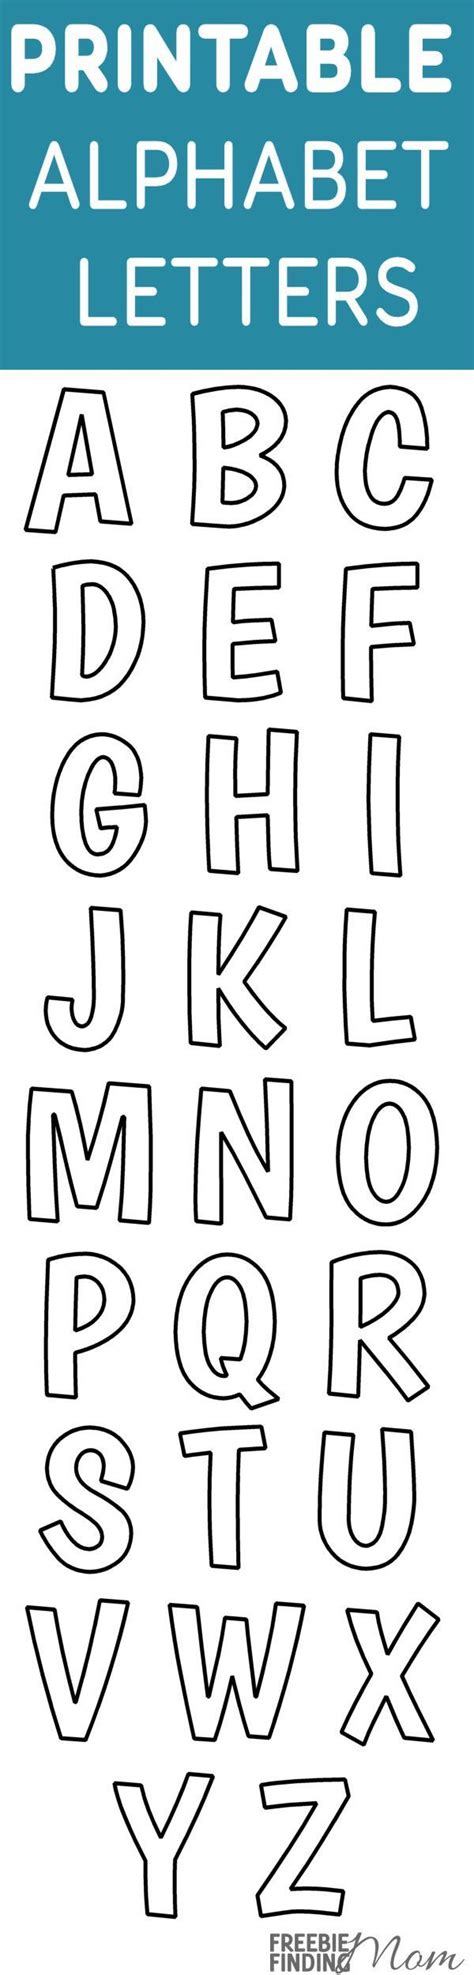 Printable Free Alphabet Templates Are Useful For A Myriad Of Projects